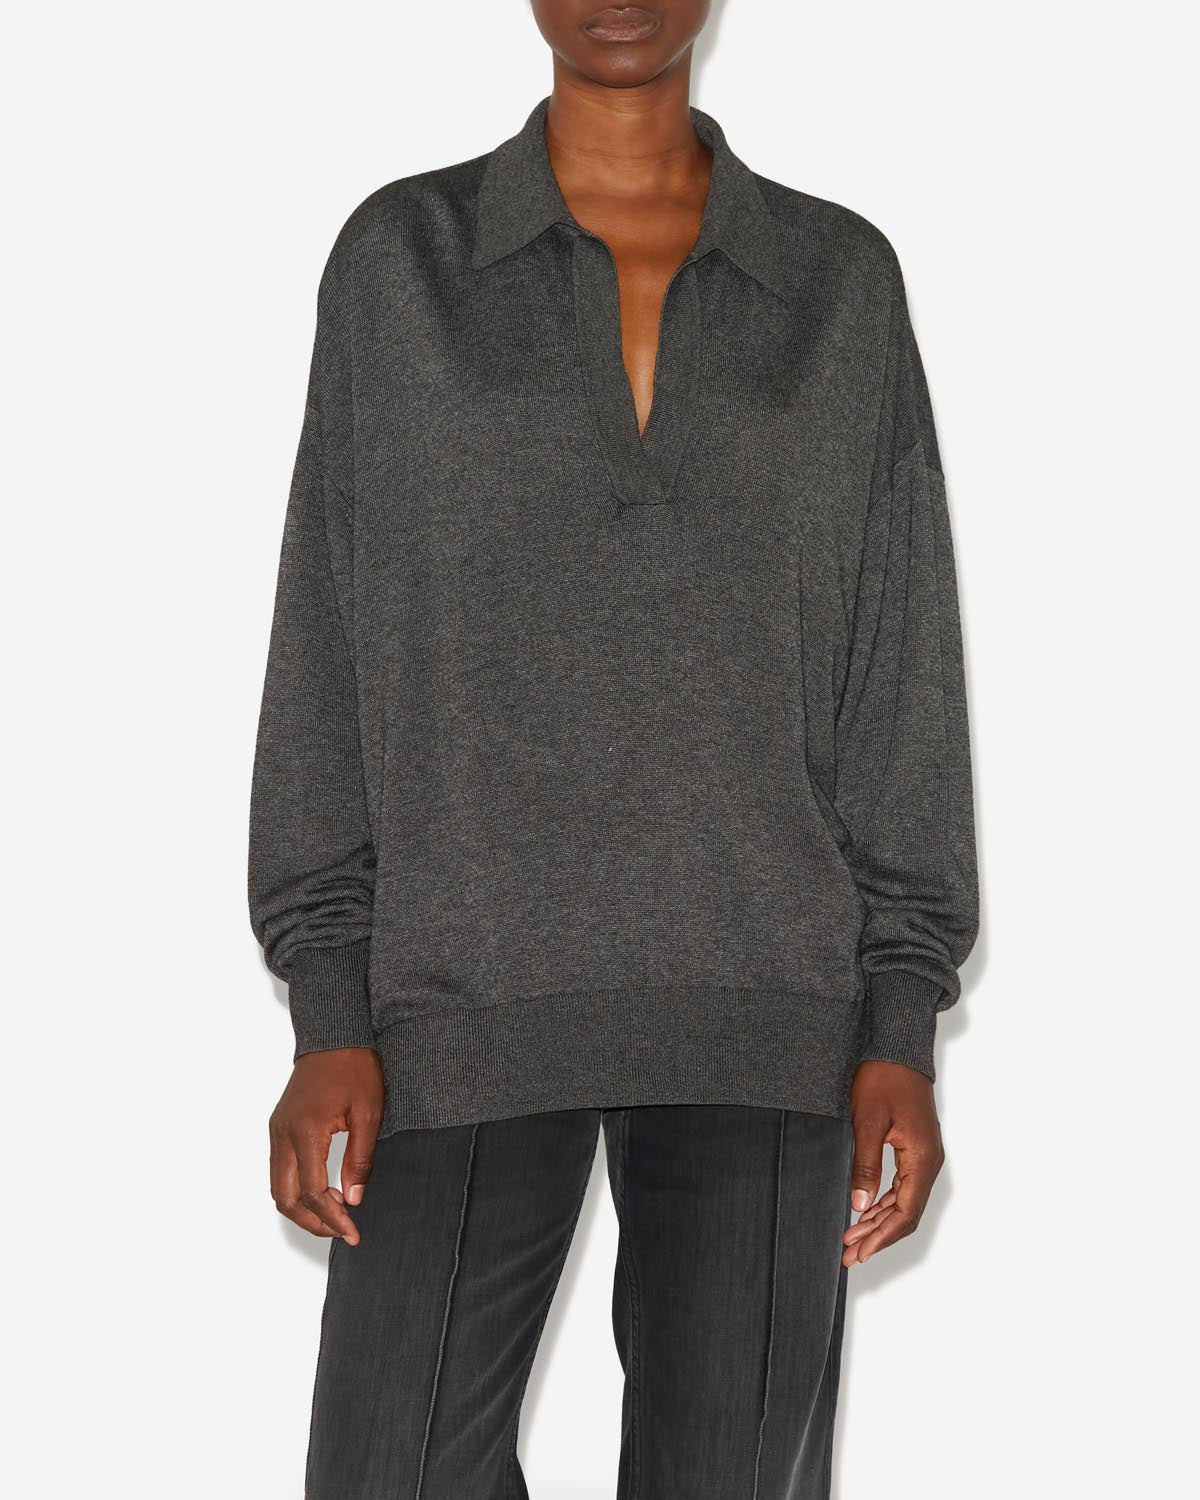 Galix pullover Woman Anthracite 5